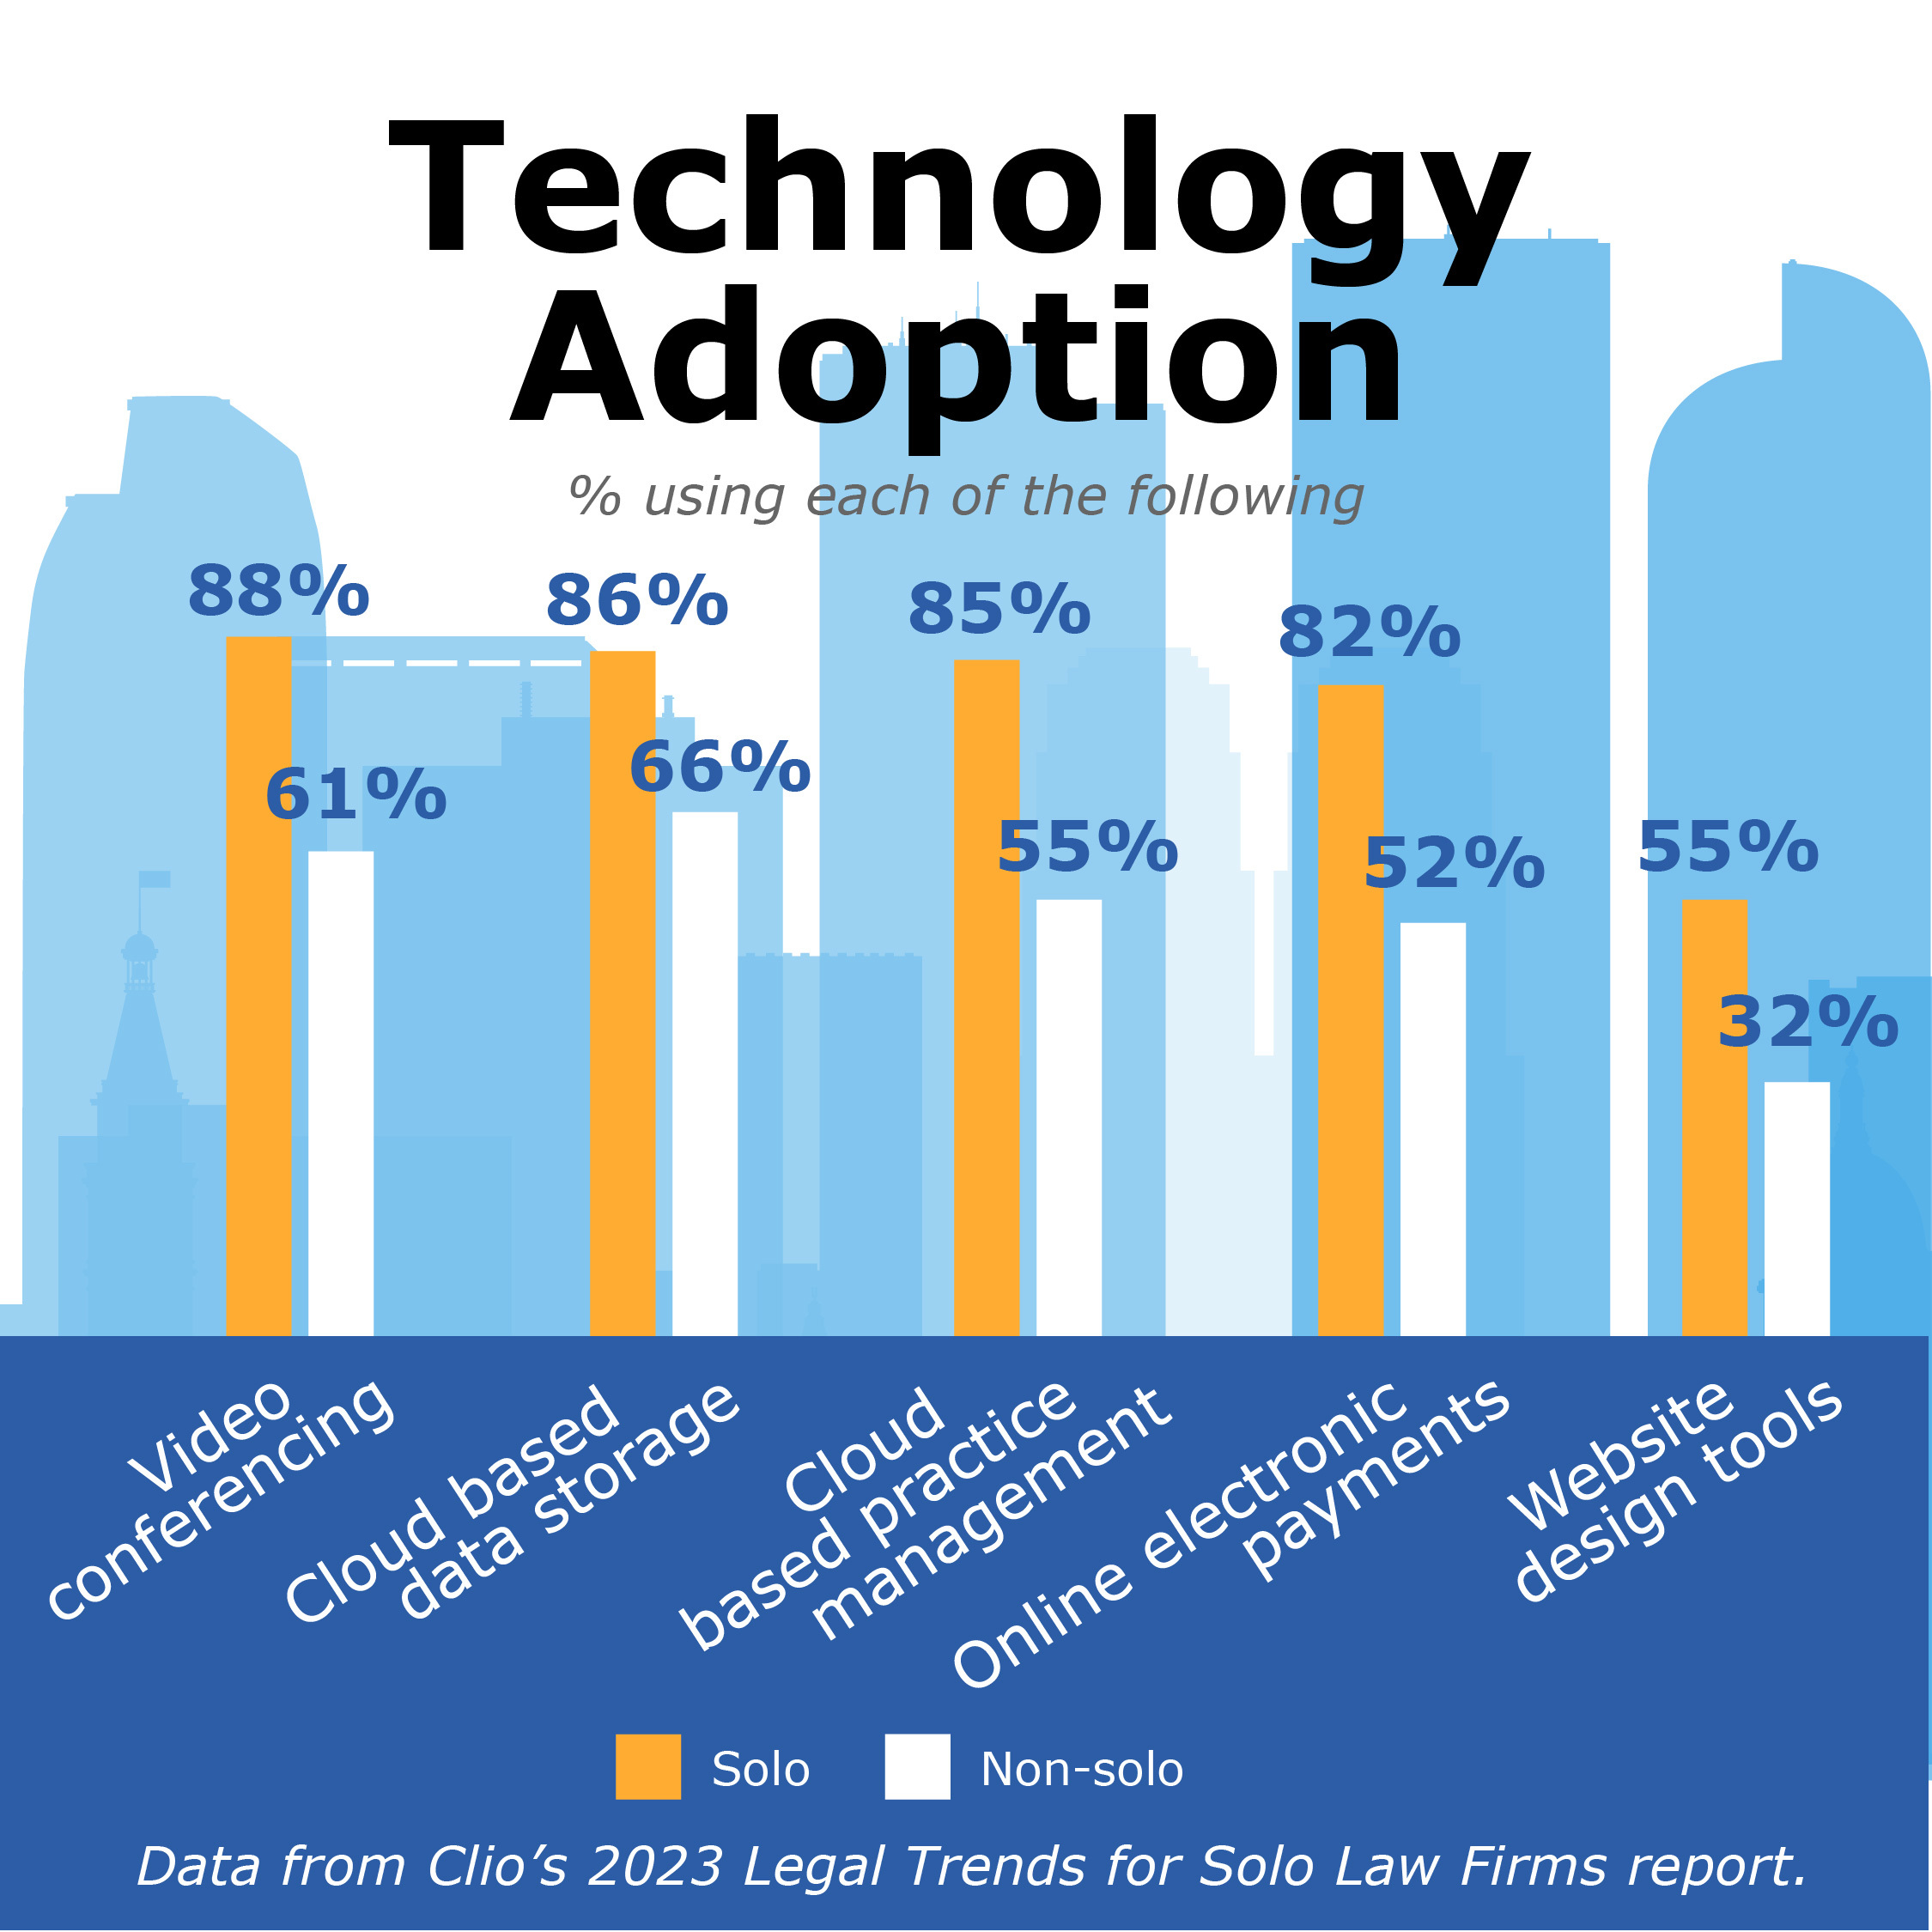 Data from Clio’s 2023 Legal Trends for Solo Law Firms report shows that solo attorneys may adopt to technology more than non-solo attorneys. Clio found that a higher percentage of solos than non-solos have adopted video conferencing, cloud-based data storage, cloud-based practice management, online electric payments and website design tools. 